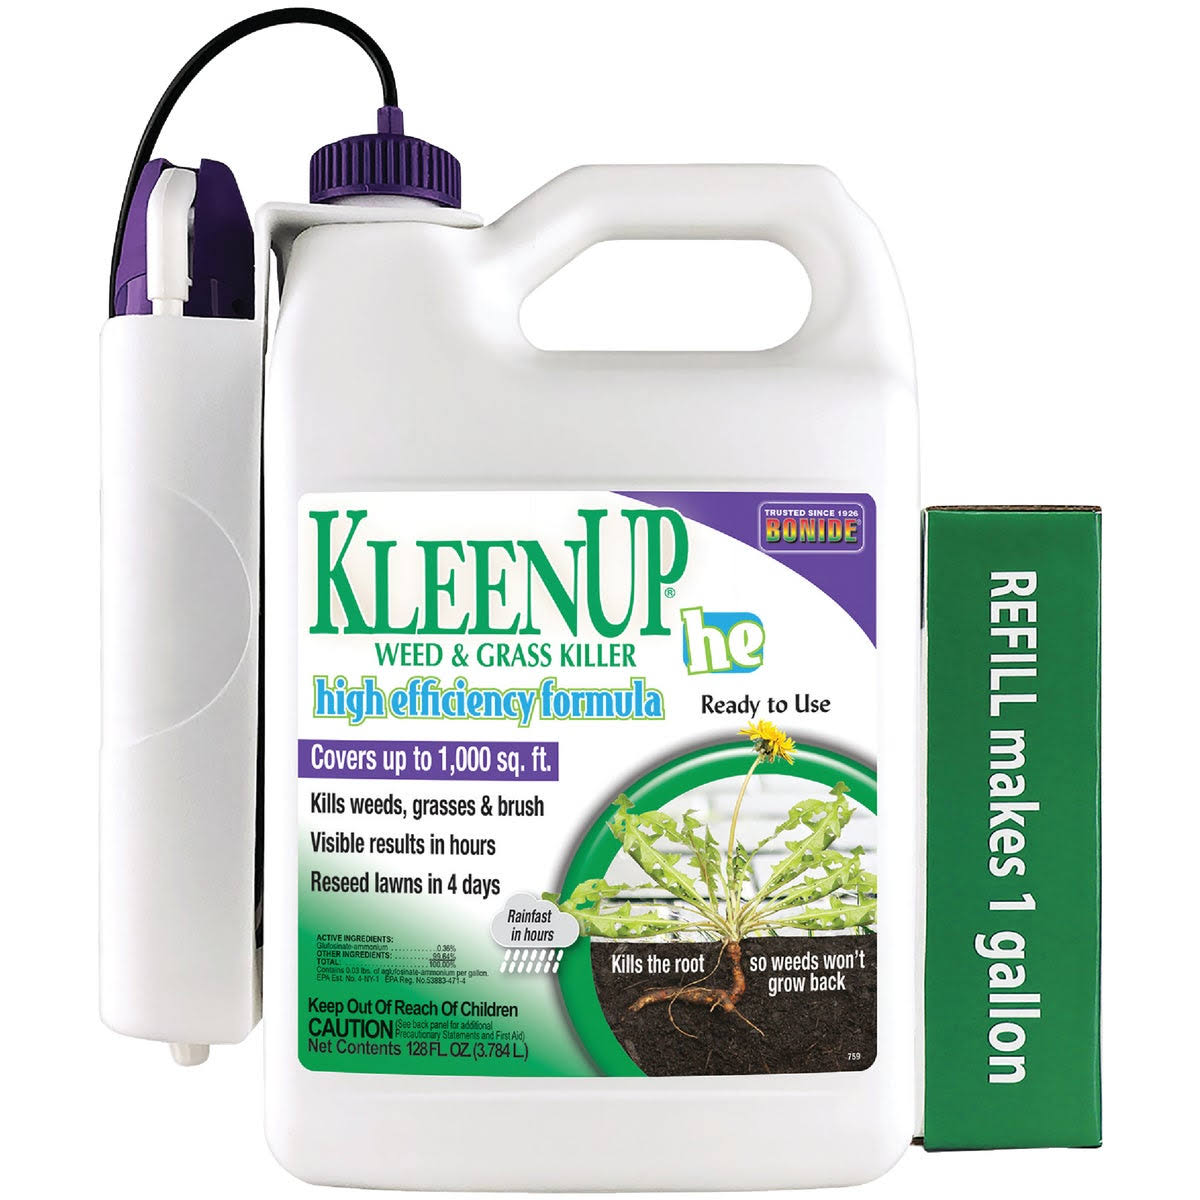 Bonide KleenUP 759 Weed and Grass Killer Ready-to-Use With Power Wand, Liquid, Off-White/Yellow, 1 Gal 3 Pack